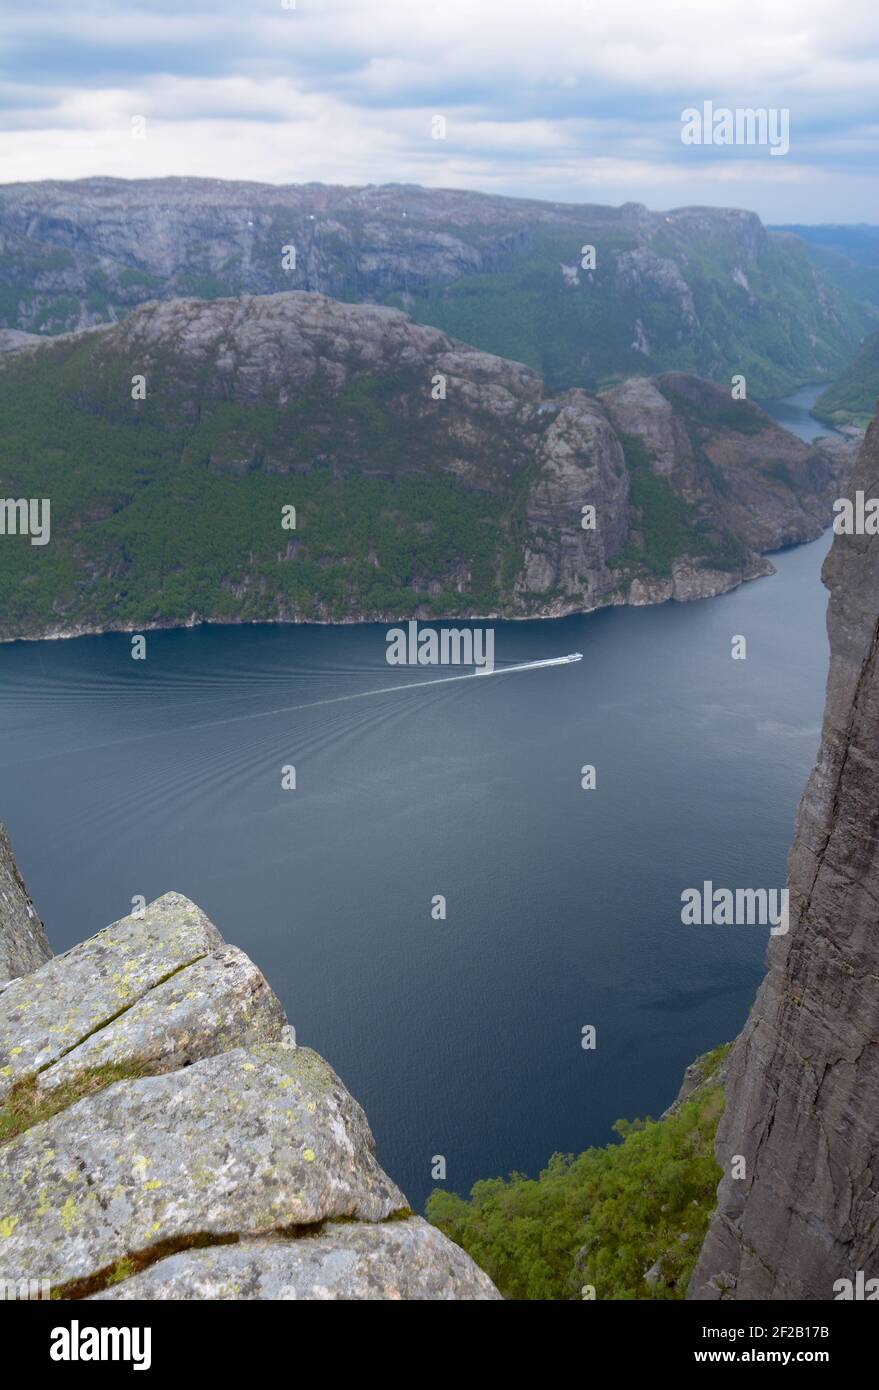 View of the Lysefjorden below and the surrounding mountains and landscape seen from the vantage point at Preikestolen in Stavanger, Norway. Stock Photo